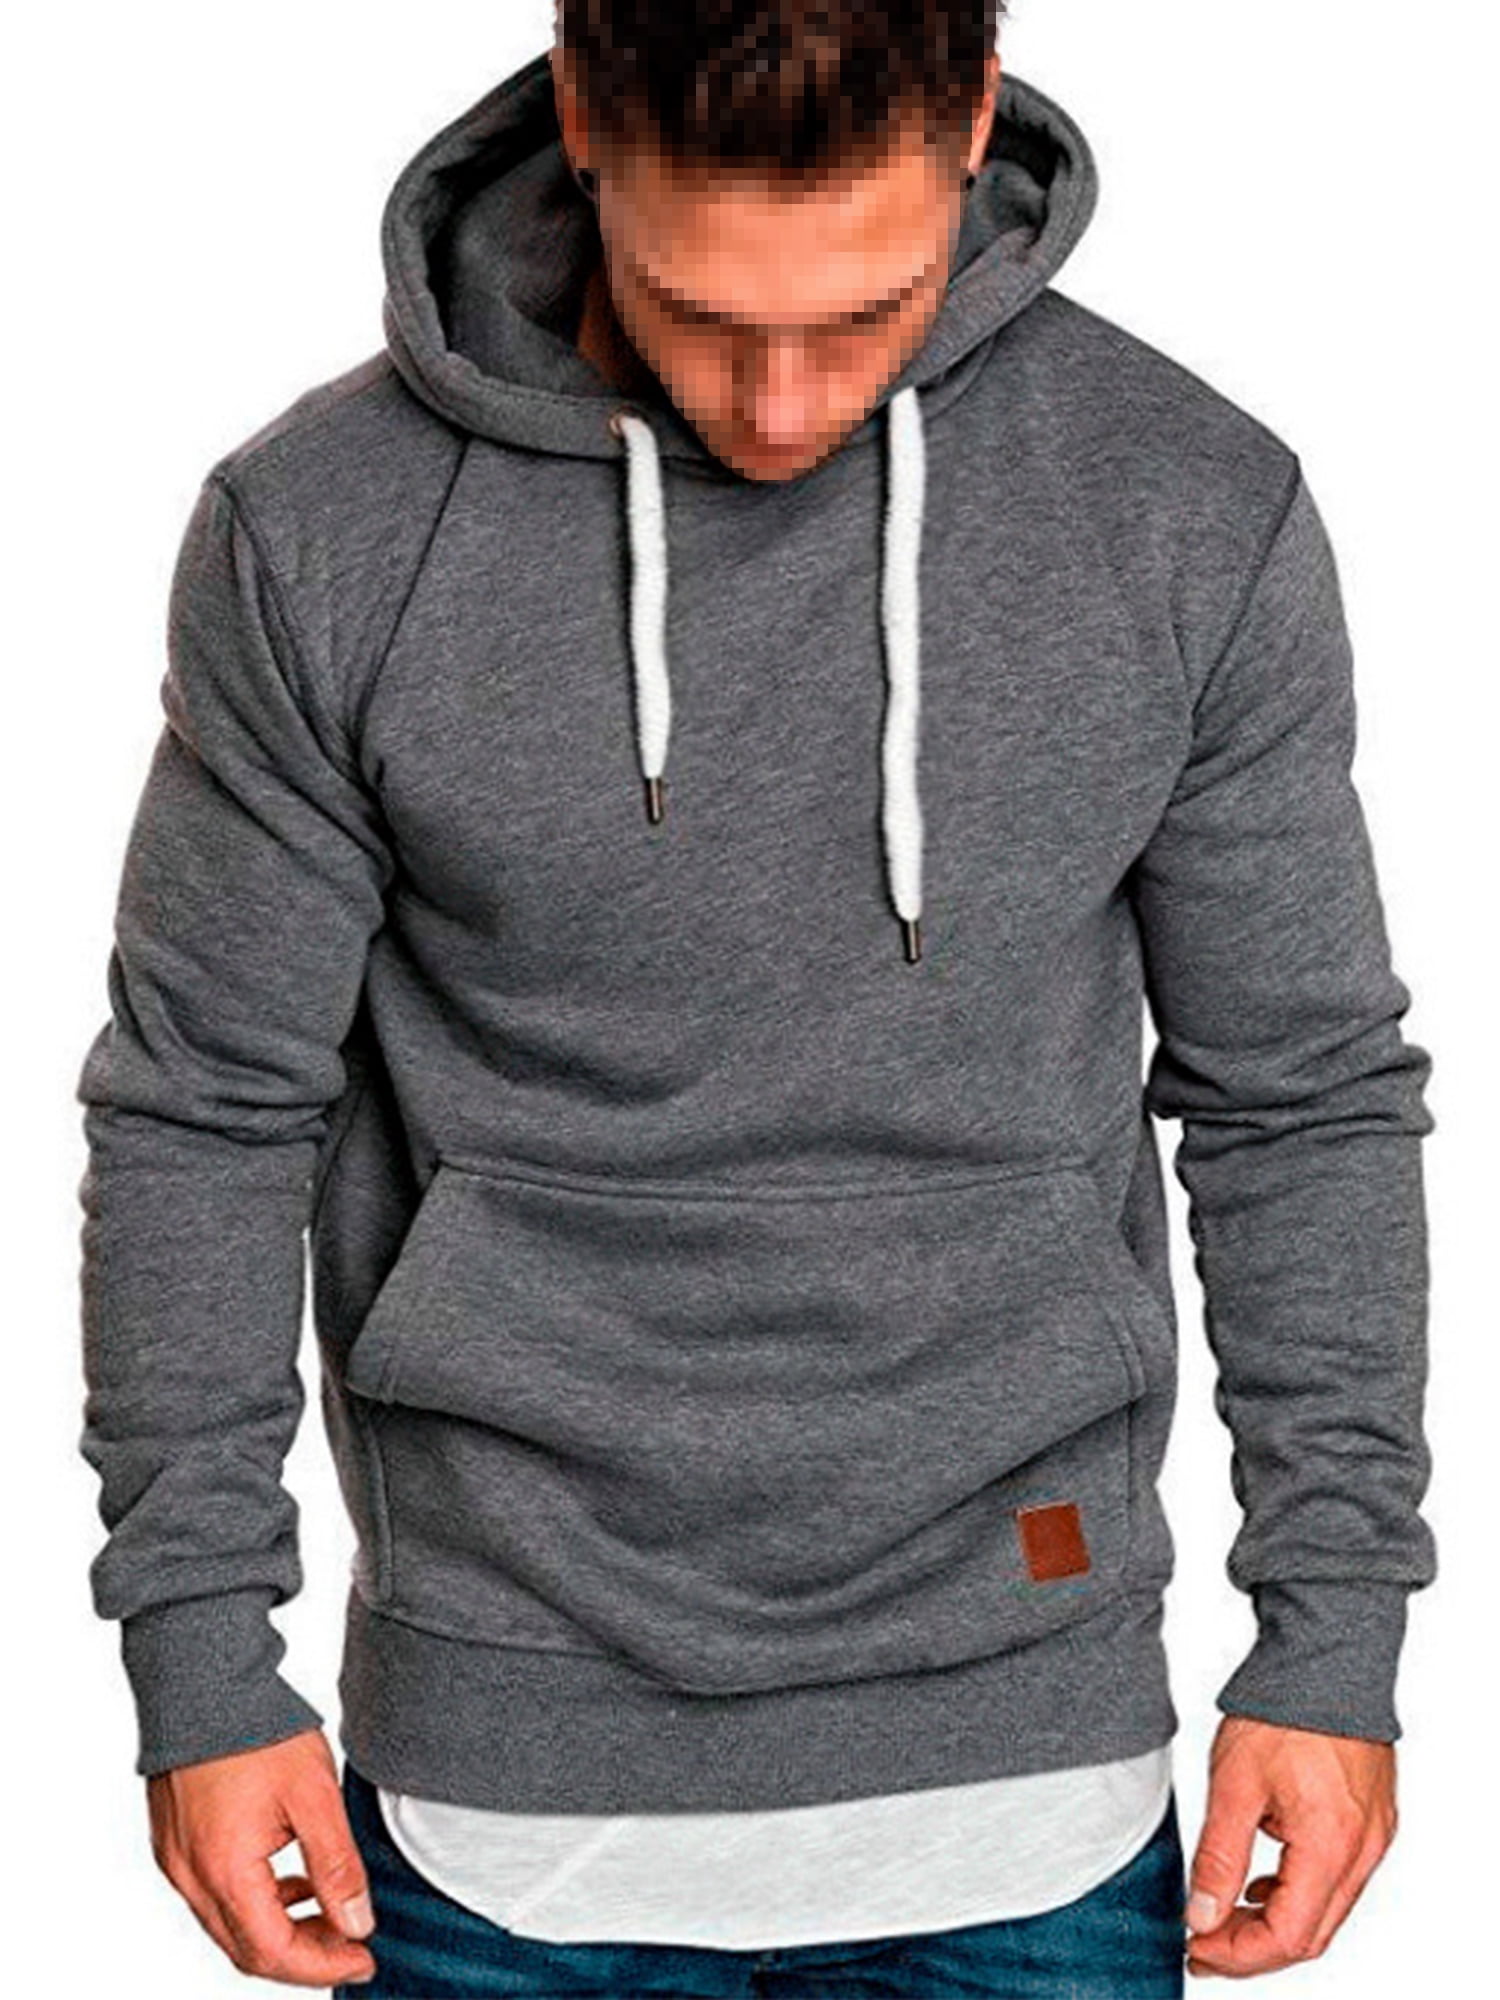 Hoodies for Men Pullover Lightweight Autumn Winter Solid Long Sleeve Drawstring Hoodies Casual Hooded Pullover Outwear 